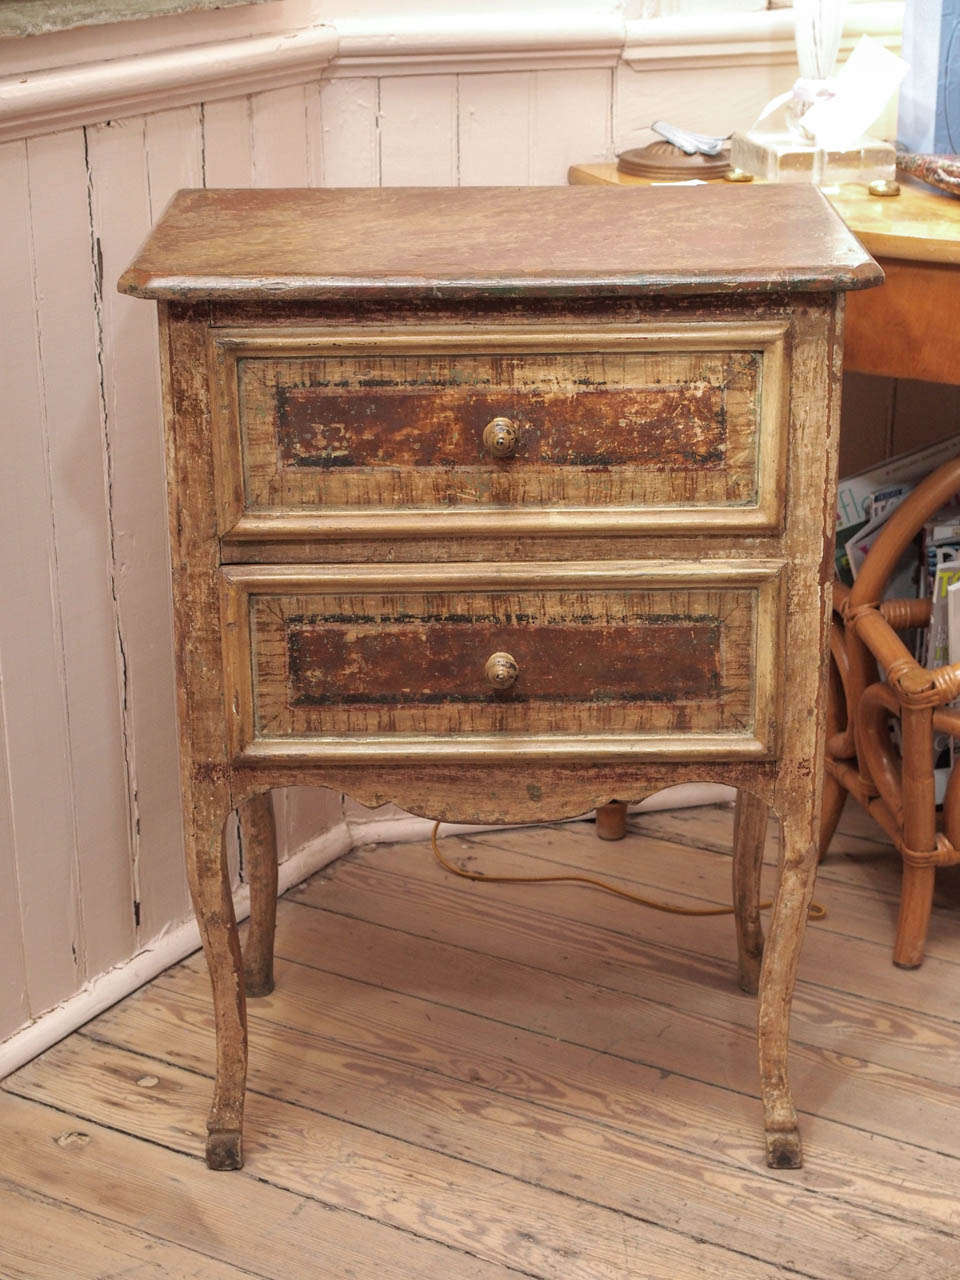 Charming 19th century painted two drawer commode with painted top with a marble like appearance and cabriole legs.